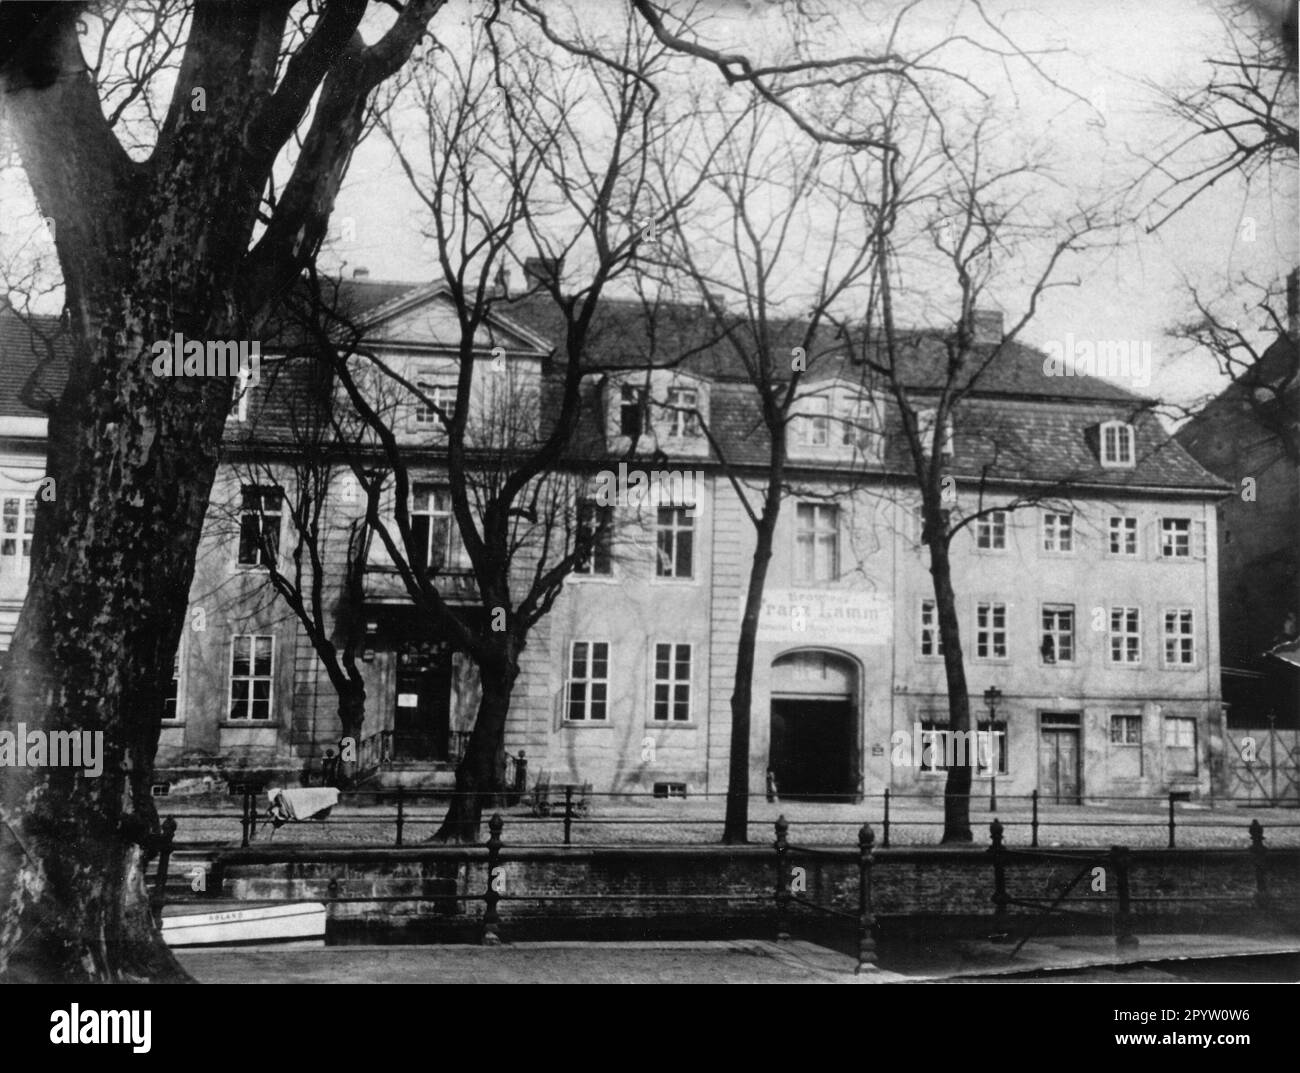 The house at Am Kanal 4a in Potsdam housed a Kindl brewery and the company belonged to city councilor Franz Lamm(see sign). The original photo was taken by the preservationist Fritz Rumpf around 1905. Photo: MAZ/Christel Köster [automated translation] Stock Photo